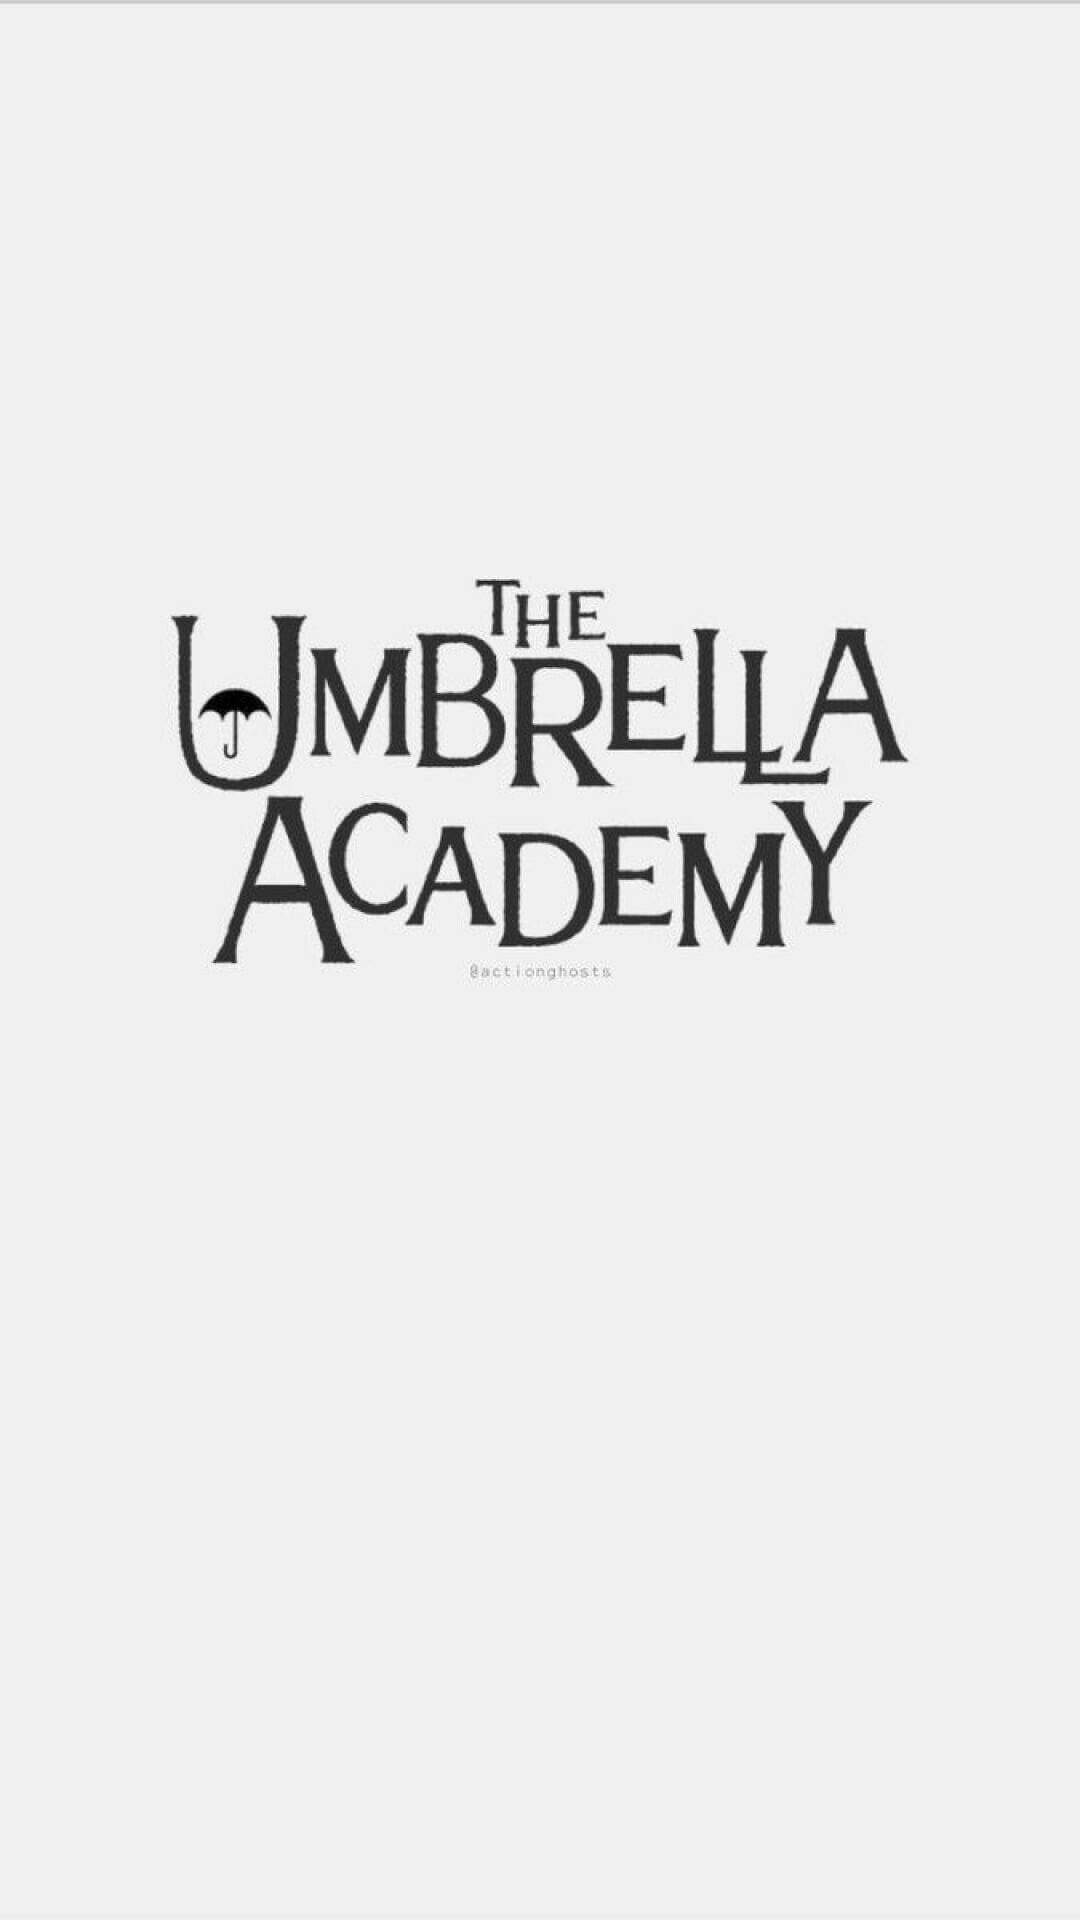 The Umbrella Academy: The story of superpowered siblings, Based on the popular Dark Horse comic of the same name. 1080x1920 Full HD Background.